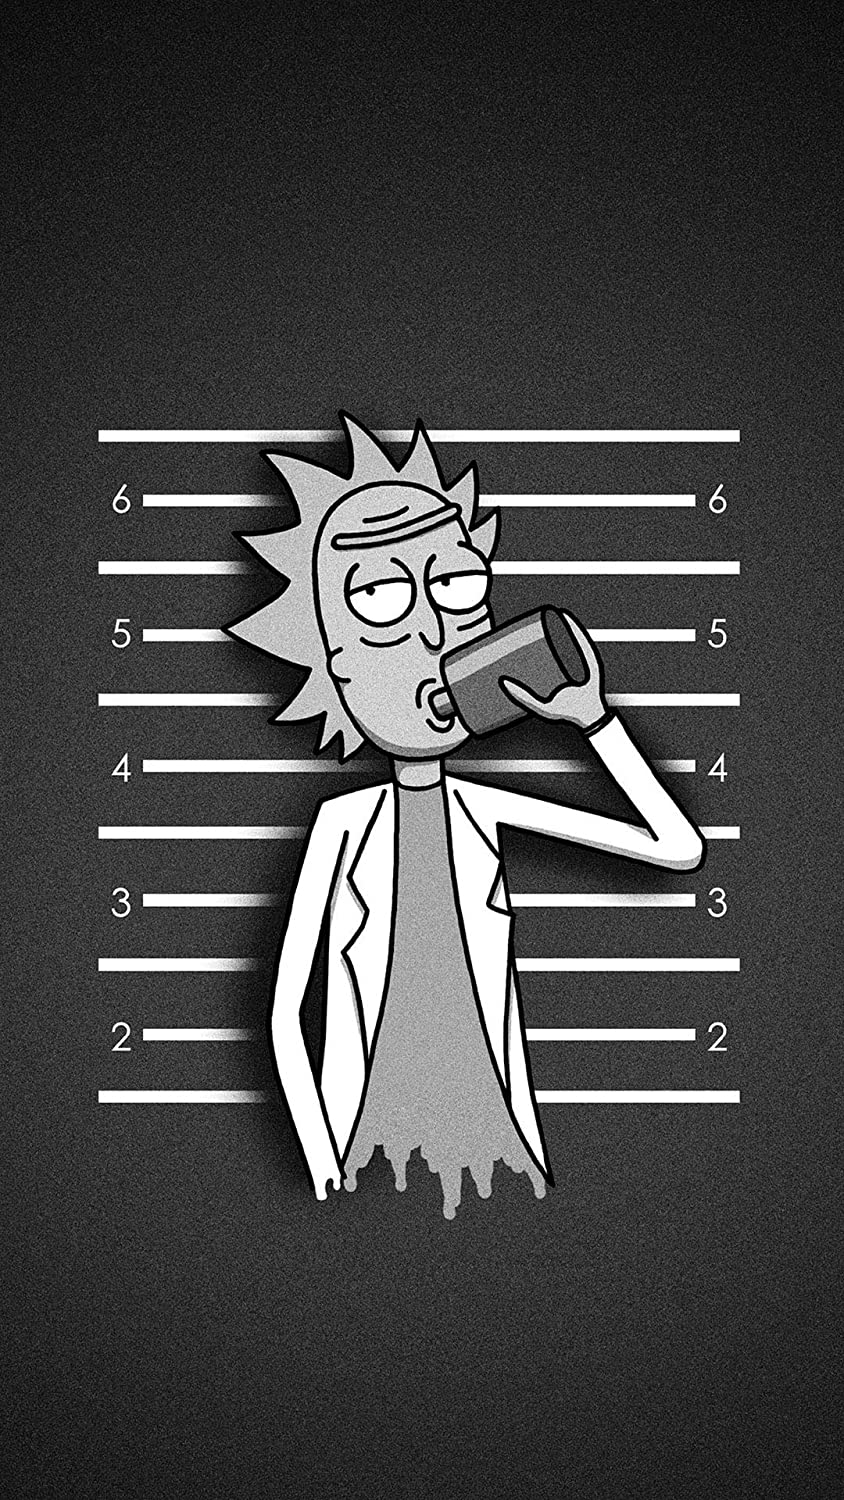 Rick and Morty Poster Black and White Wall Decor Wall Print Wallpaper Home Decor Wall Accessories Gift for Him Gift for Her: Handmade